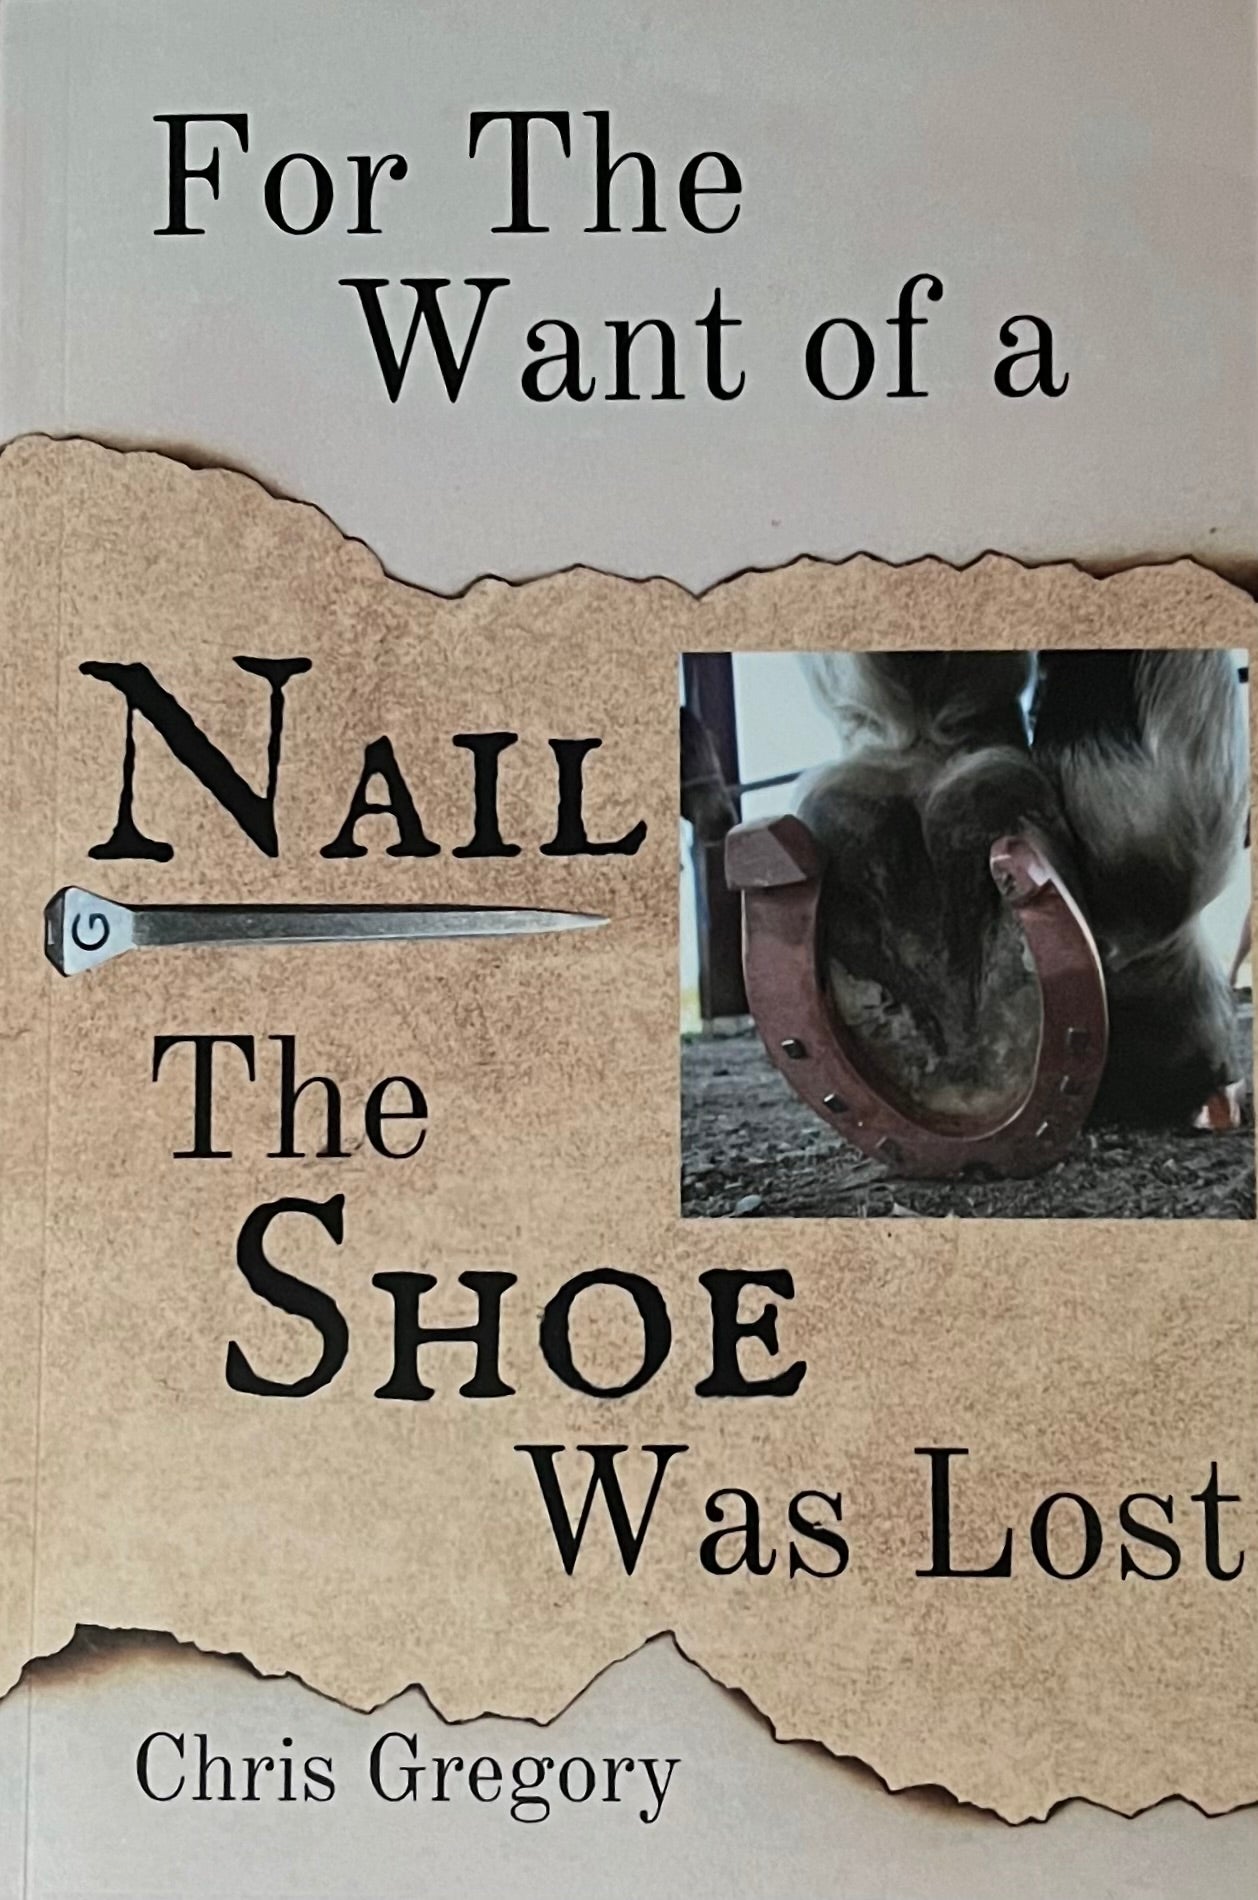 For want of a nail/for all nails by QuantumBranching on DeviantArt